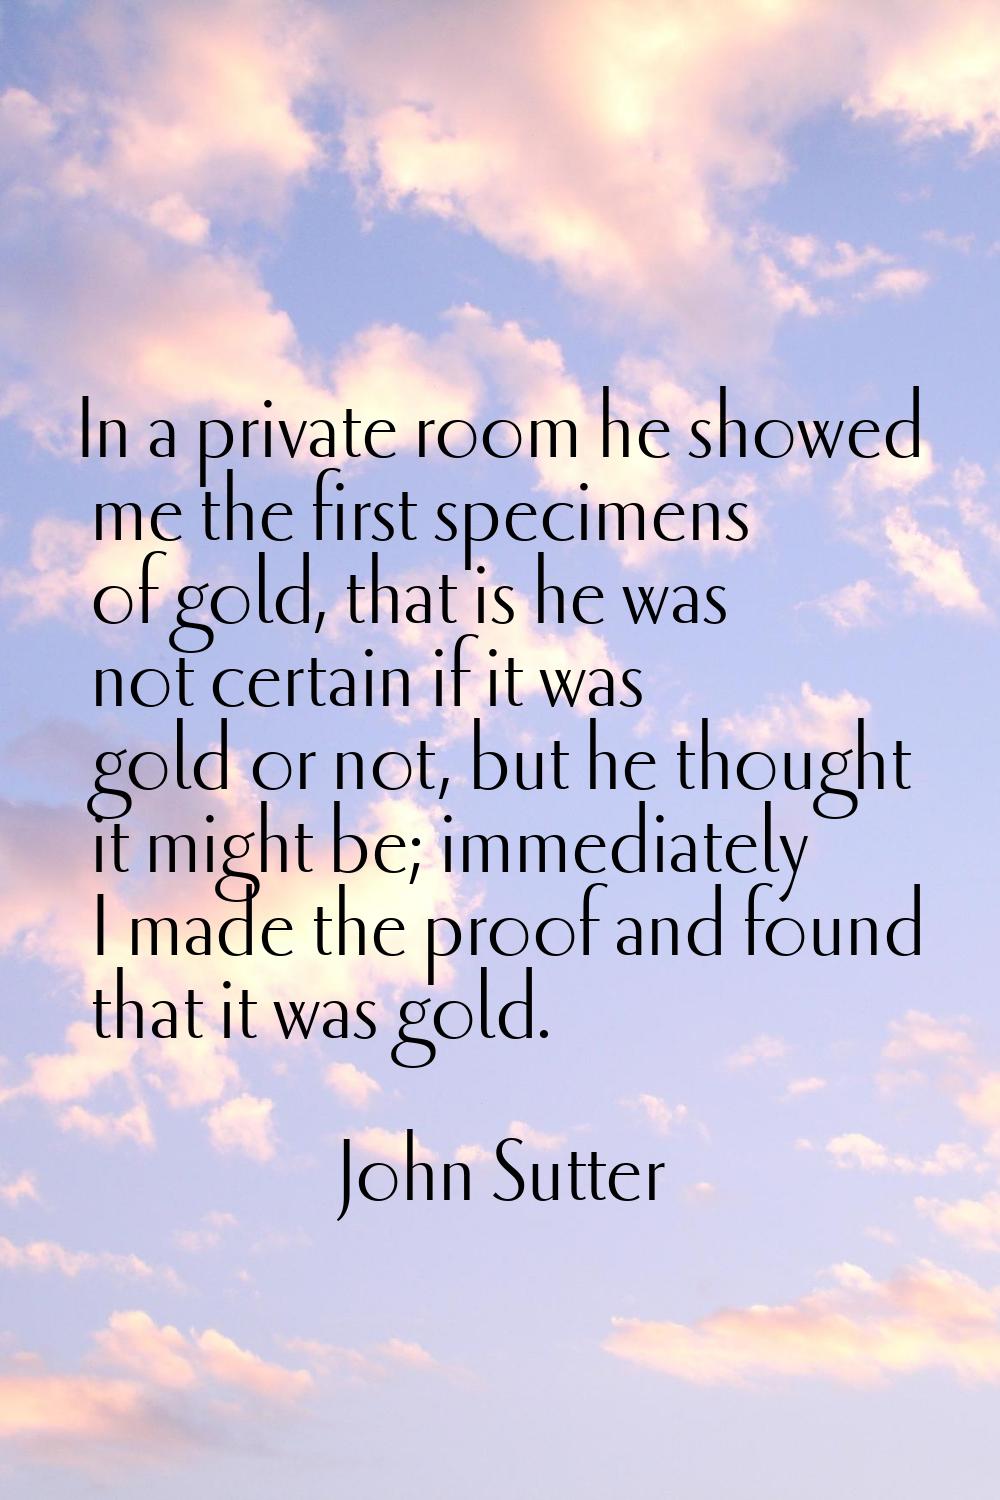 In a private room he showed me the first specimens of gold, that is he was not certain if it was go